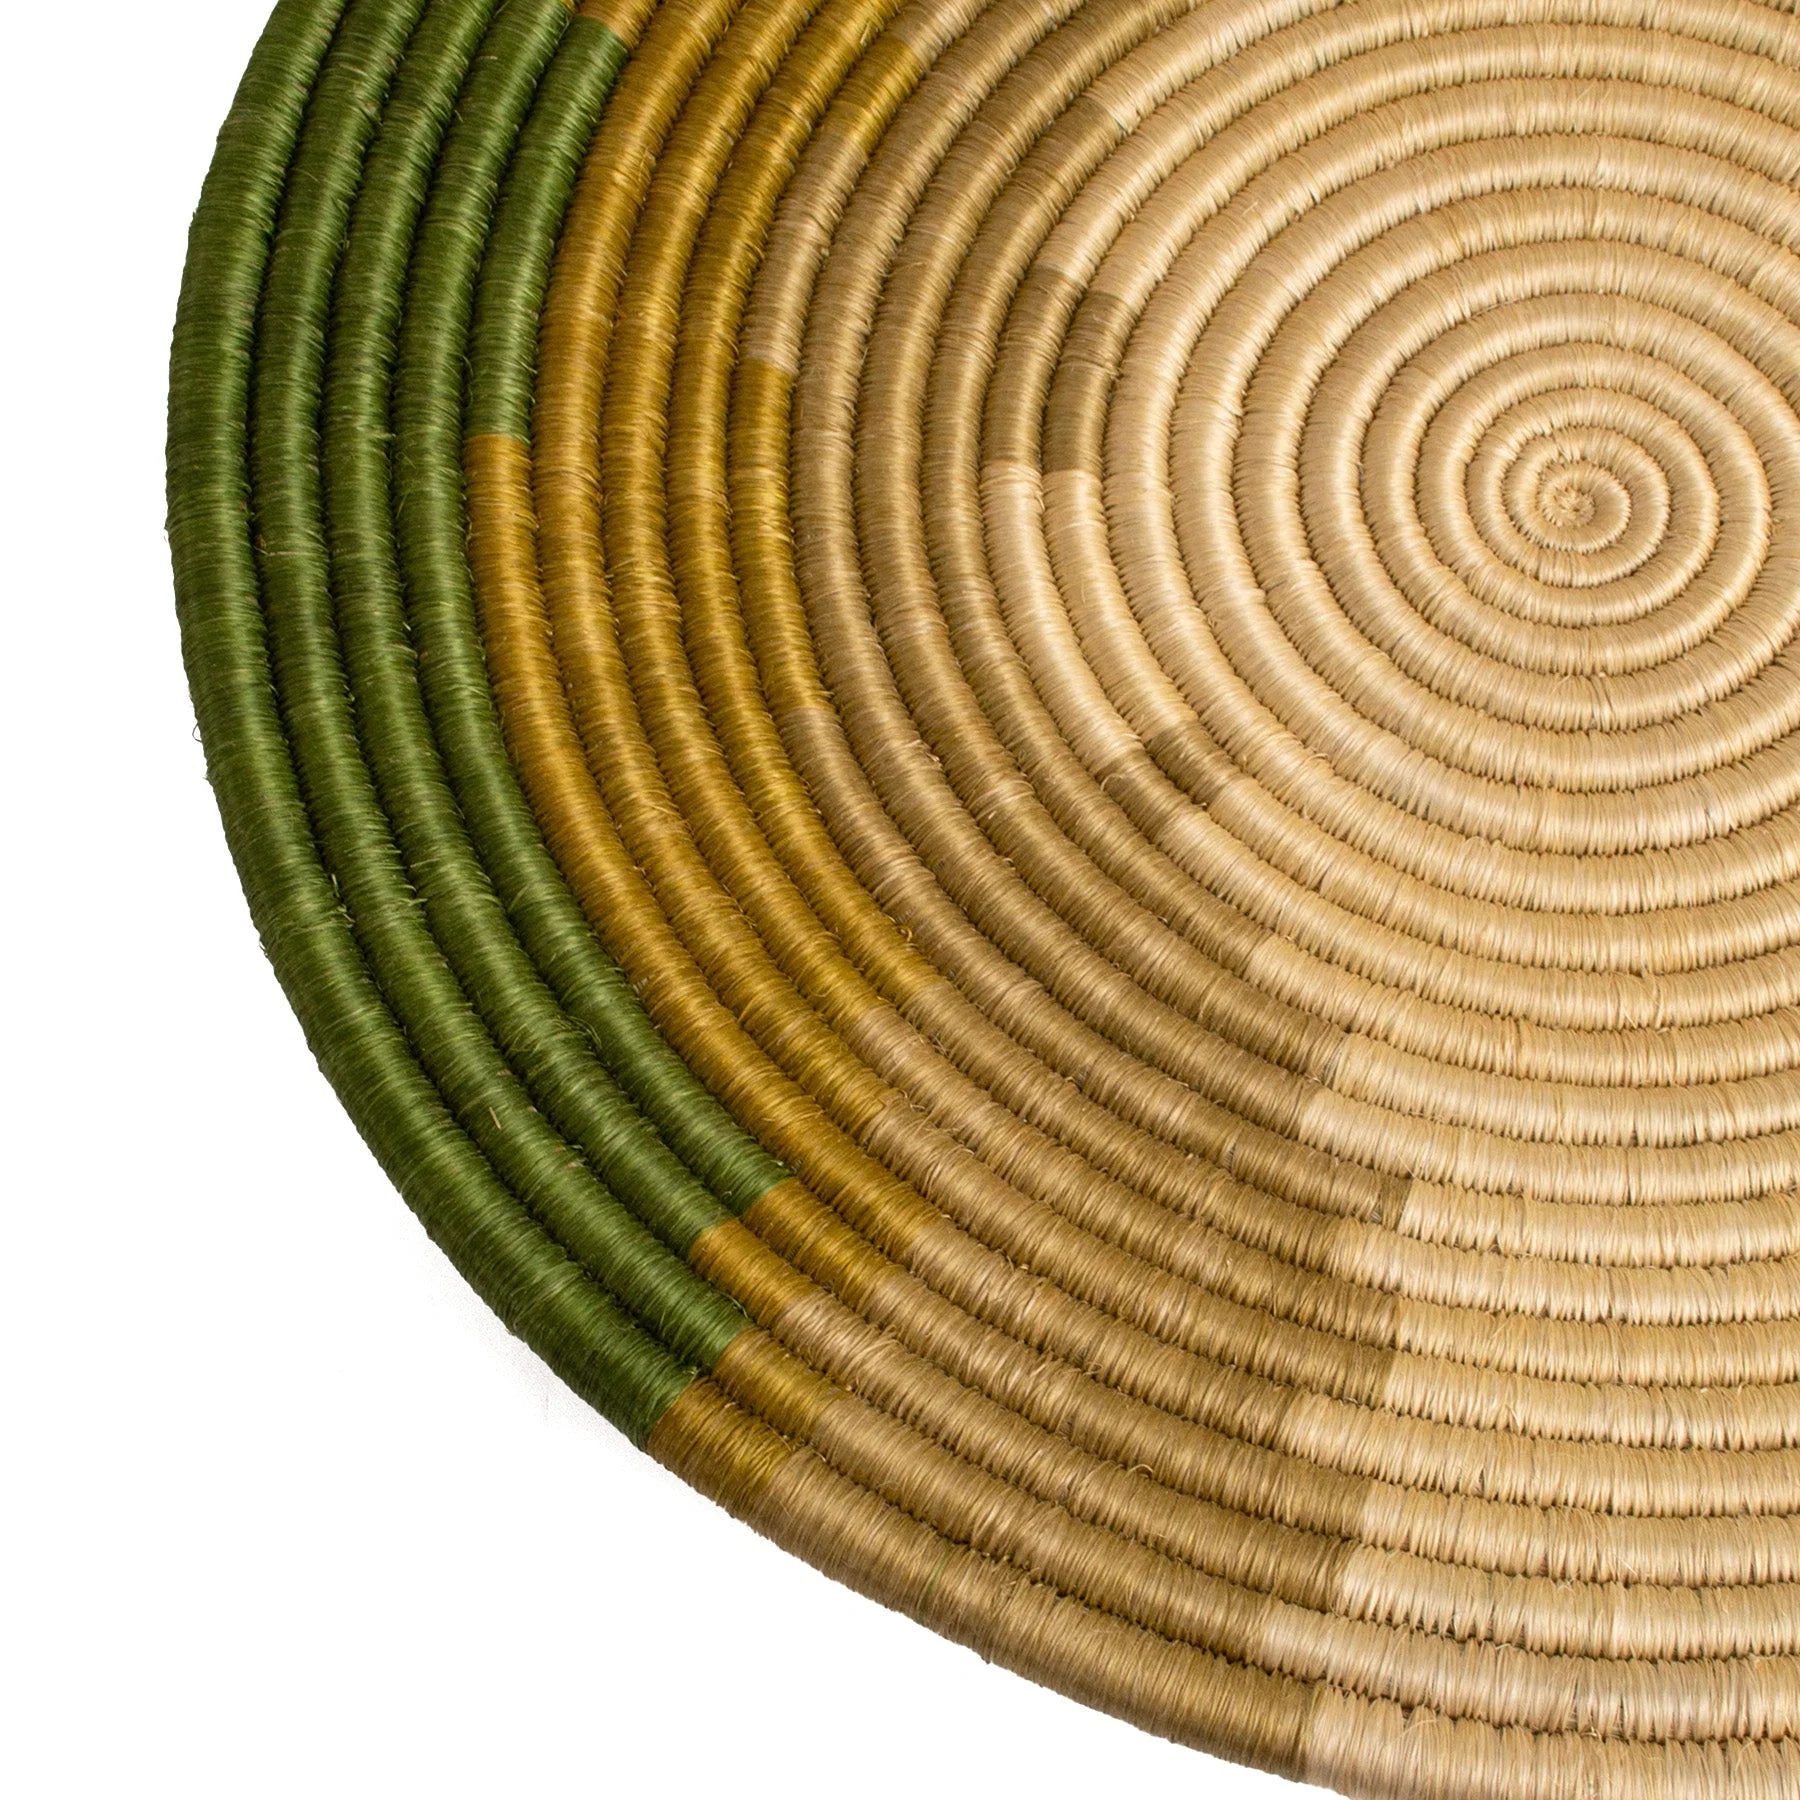 Circular woven mat featuring concentric circles in shades of beige and green, with a gradual transition in colors from the center to the perimeter, perfect for a Scottsdale Arizona bungalow by Kazi Goods.